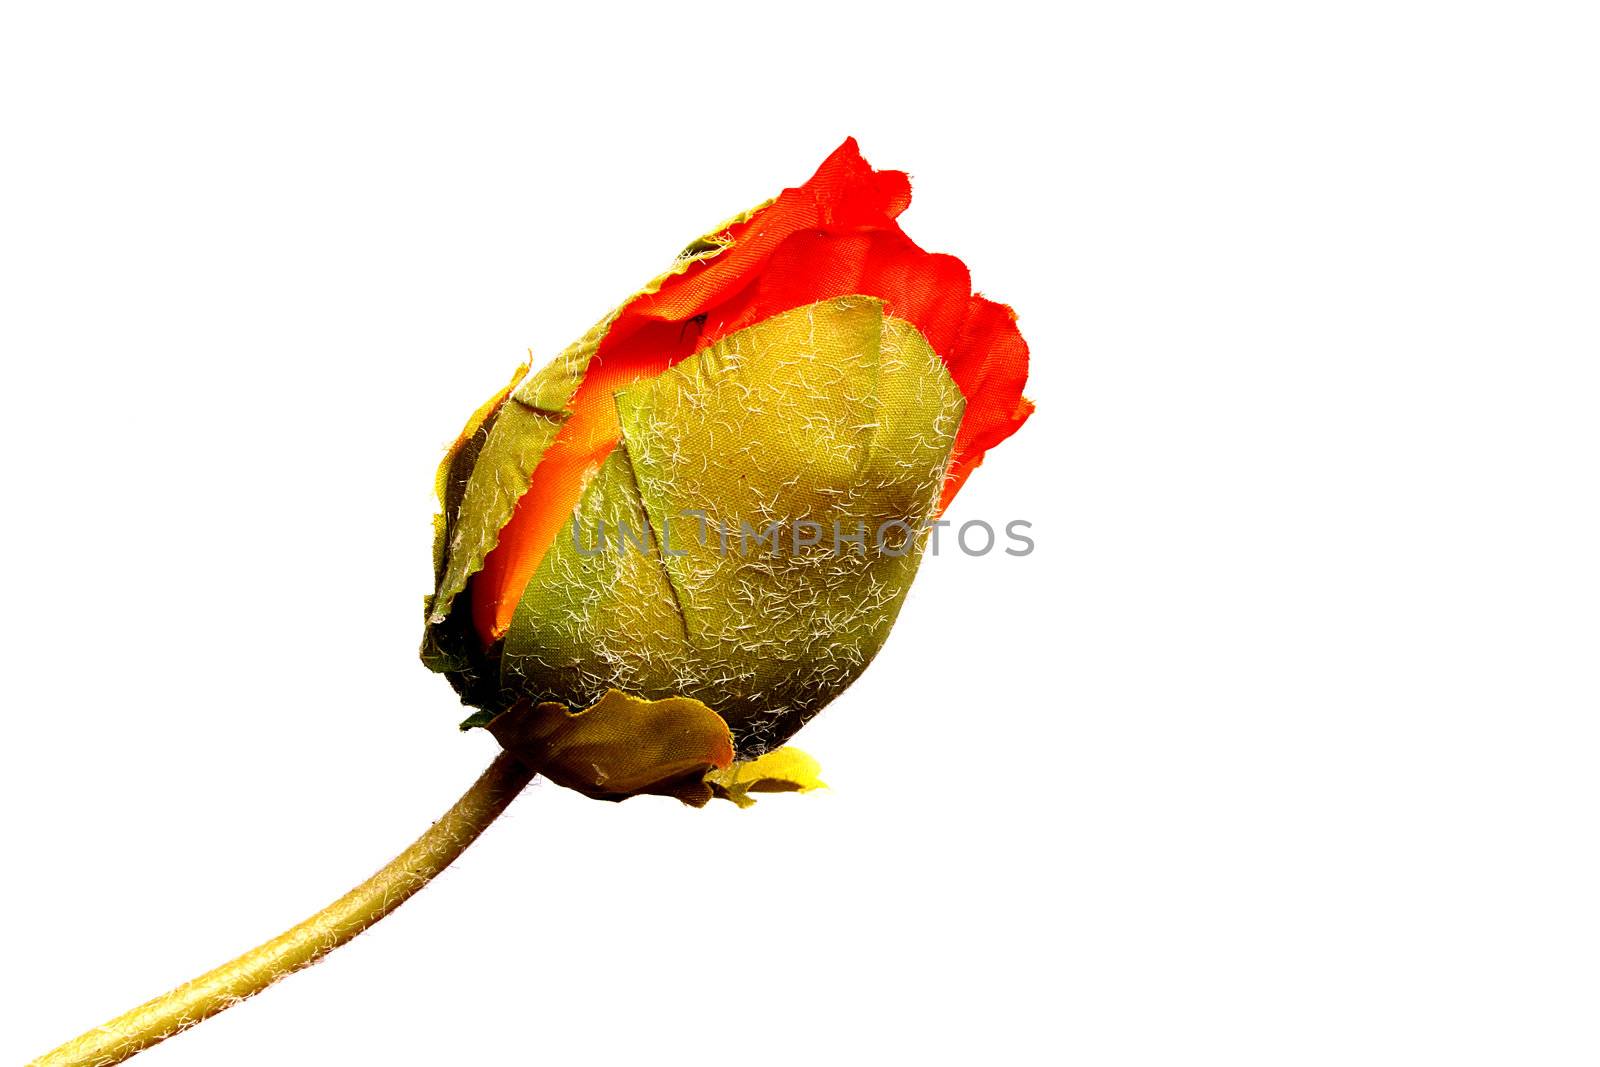 The red poppy, flower is made of artificial materials.